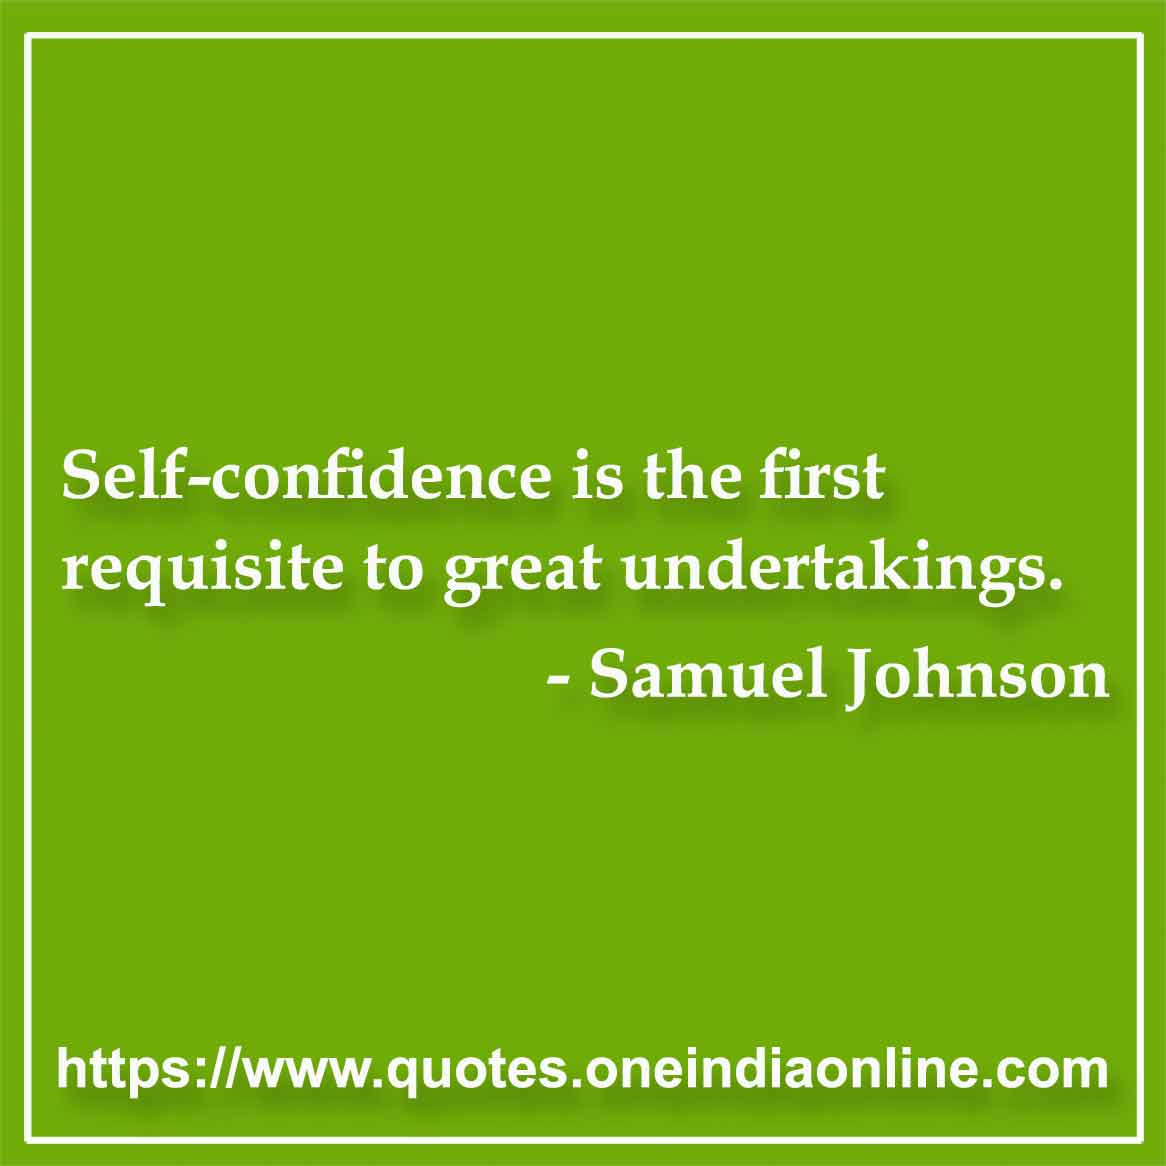 Self-confidence is the first requisite to great undertakings.

- Samuel Johnson Quotes